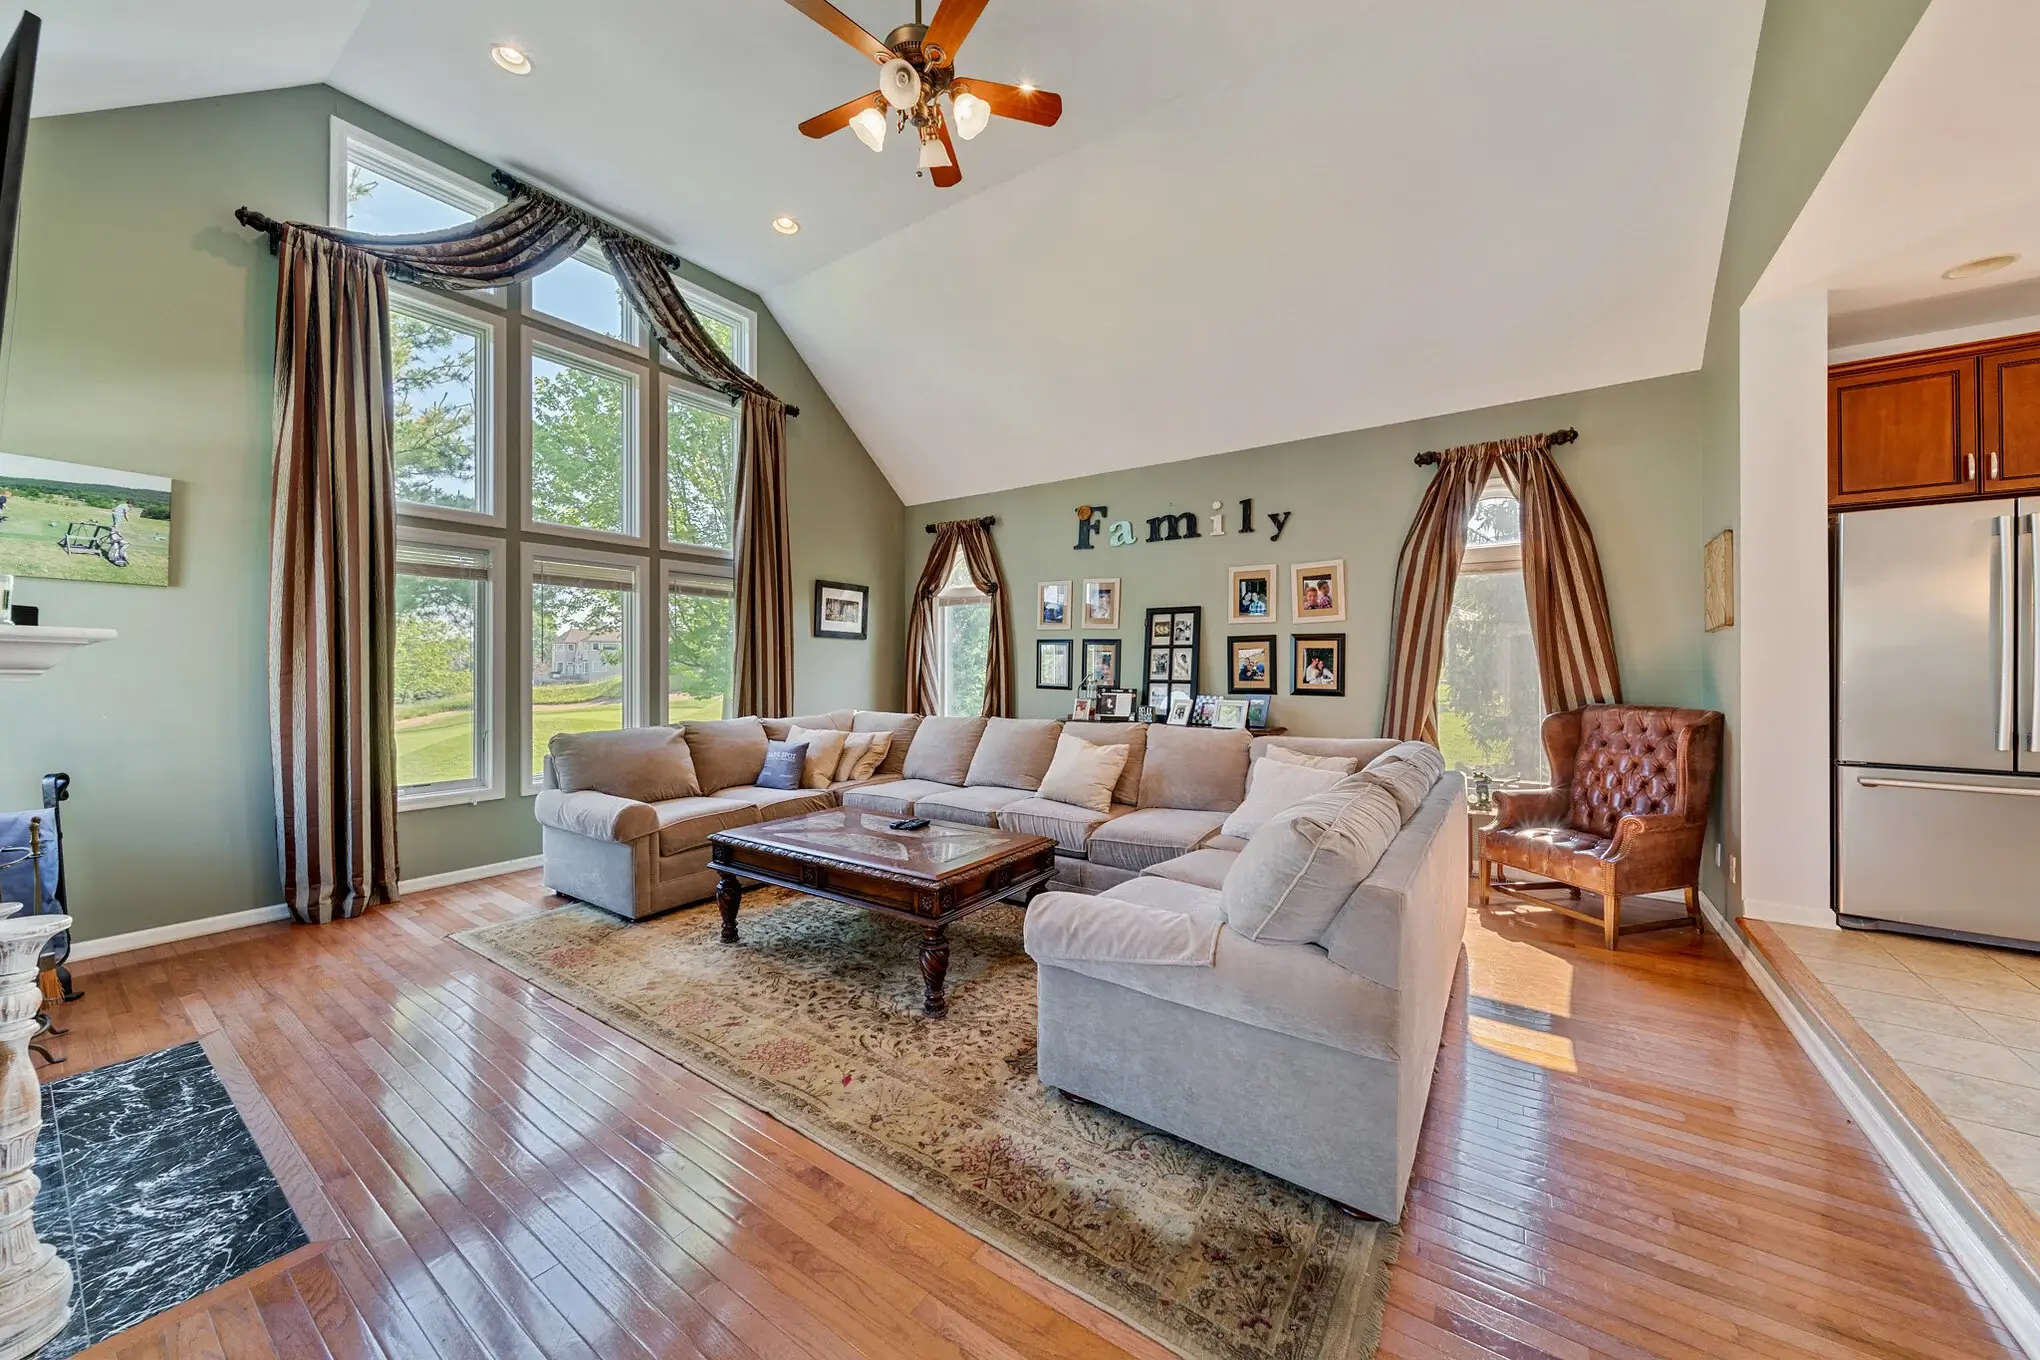 Large family room with high ceiling, wood floor and green walls with a large sofa and in the center.